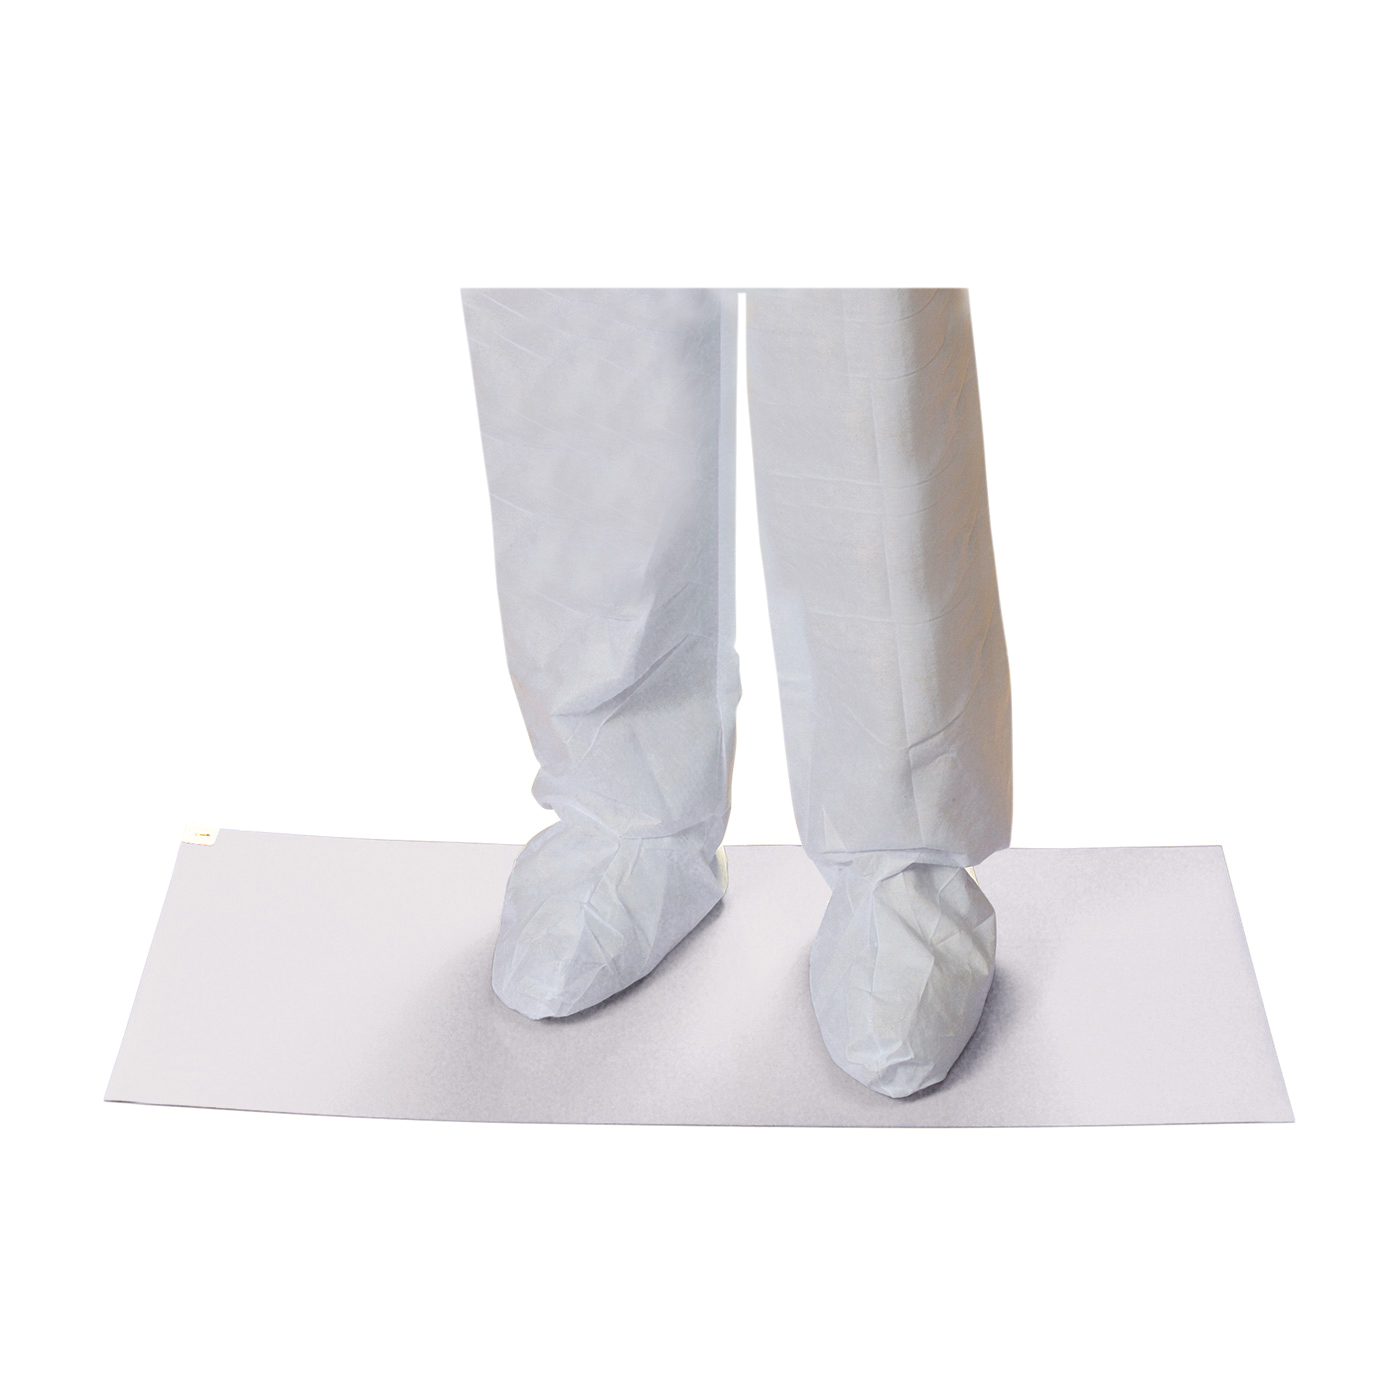 PIP® CleanTeam® 100-93-264564W Contamination Control Clean Room Mat, 45 in L x 26 in W x 0.05 mm THK, White, Polyethelene, 60 Sheets per Mat